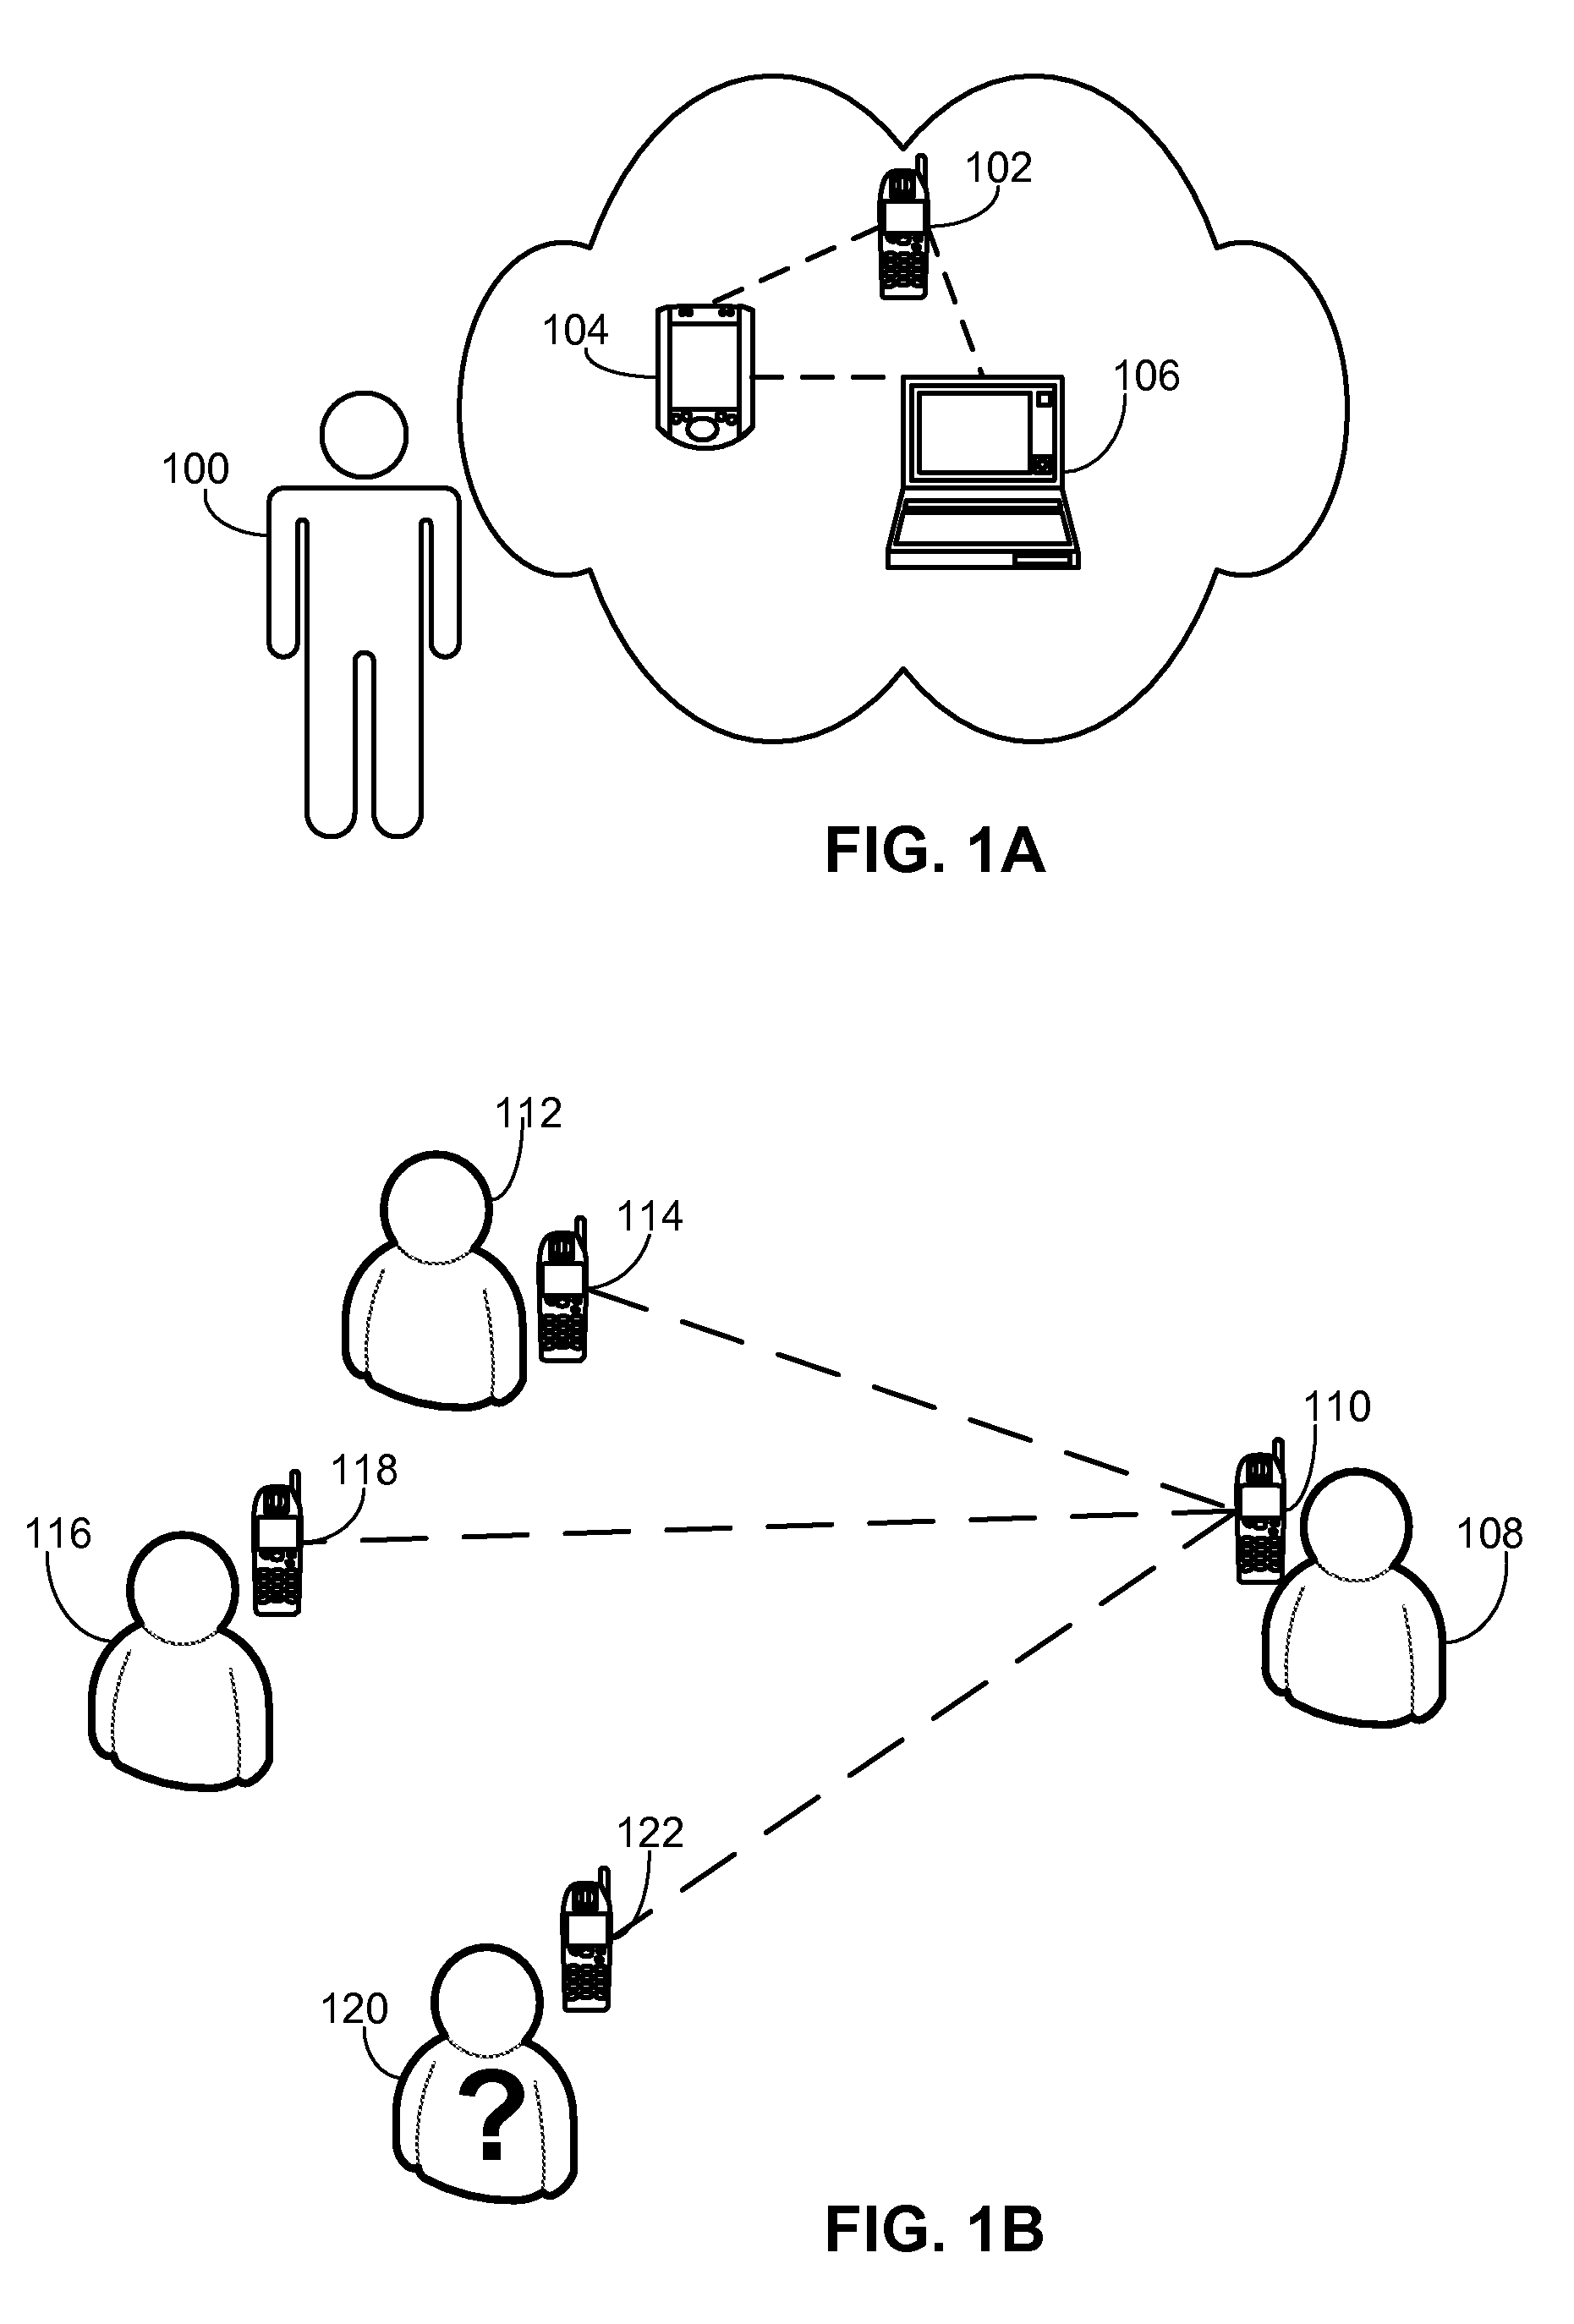 Adjusting security level of mobile device based on presence or absence of other mobile devices nearby